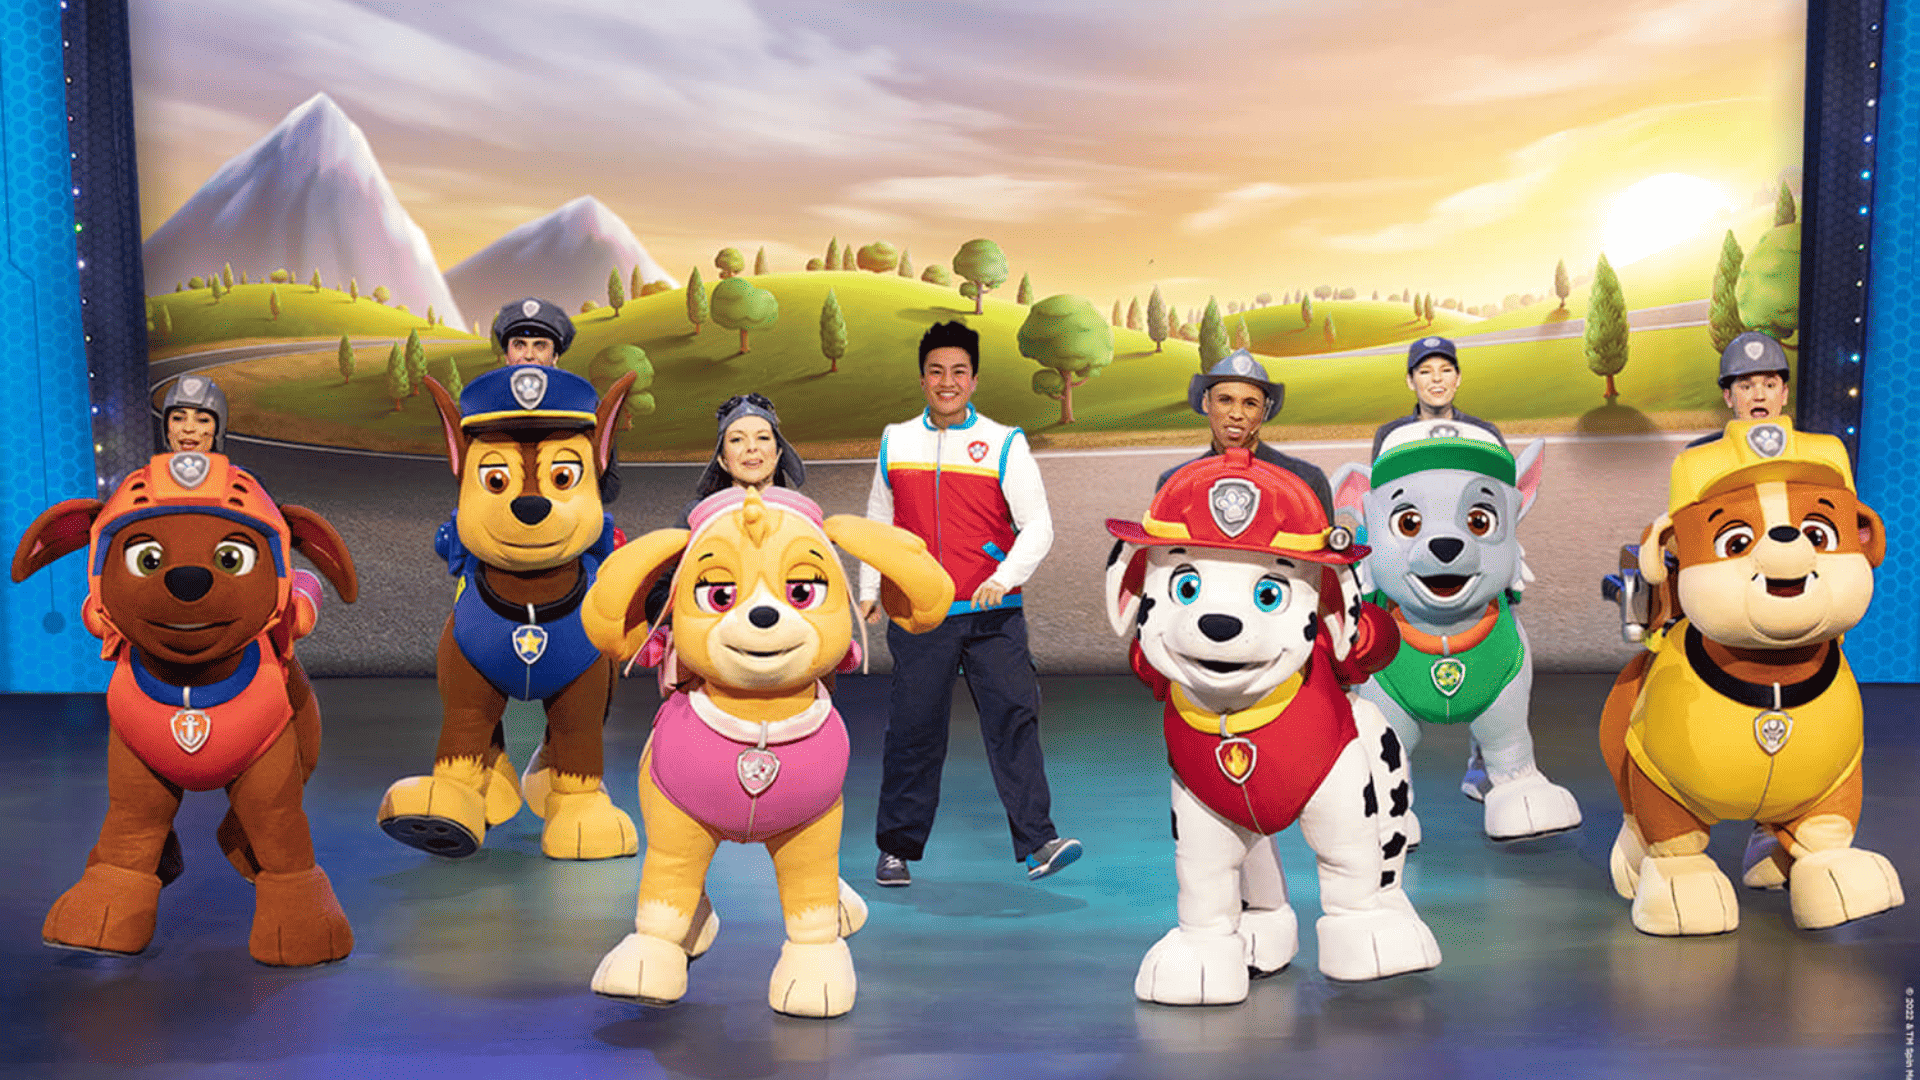 PAW Patrol Live! brings TV's most loved pups to The Mahaffey this